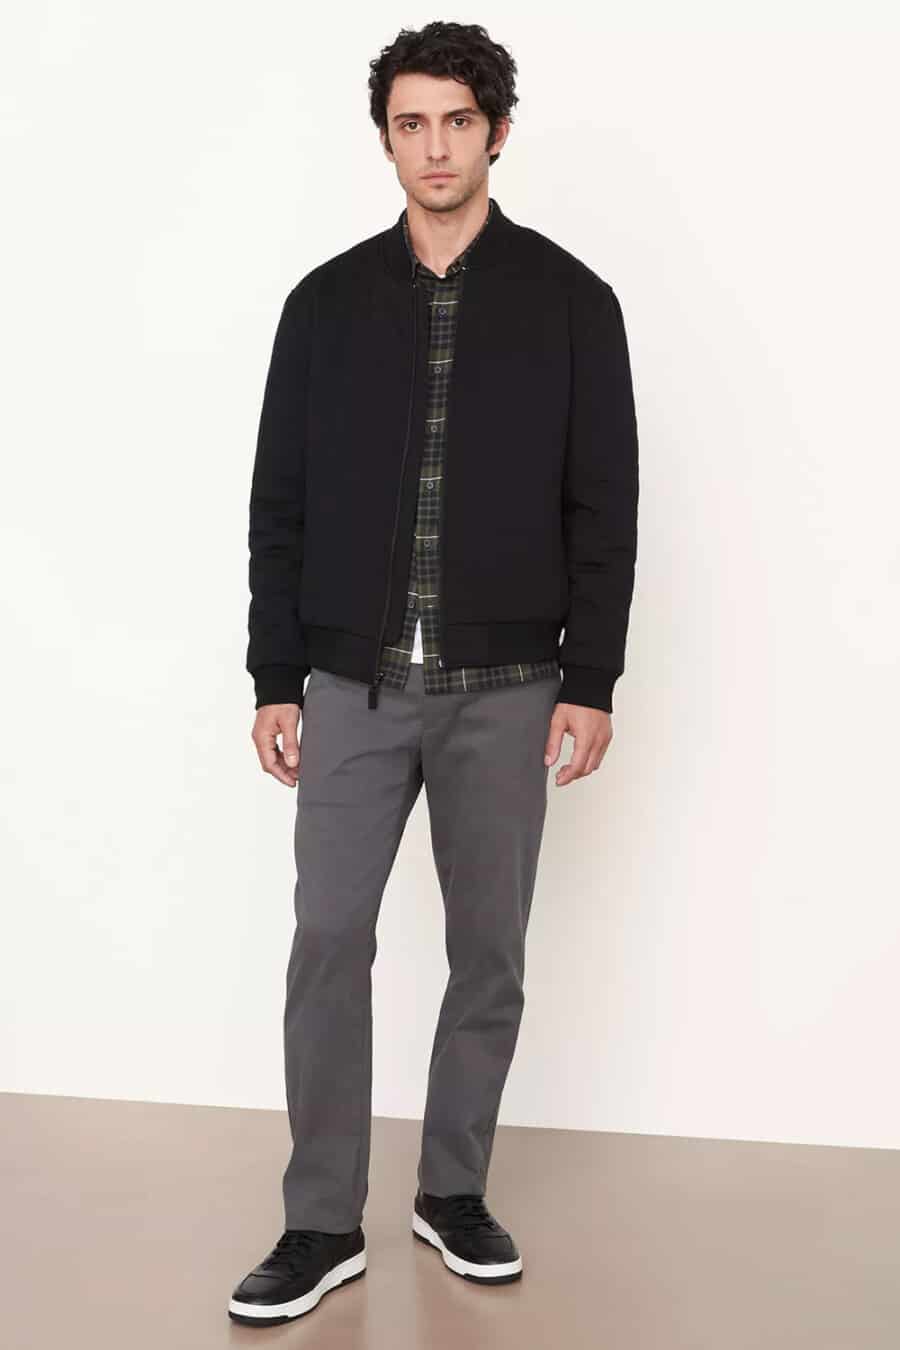 Men's dark grey chinos, green checked flannel shirt, black bomber jacket and black sneakers outfit